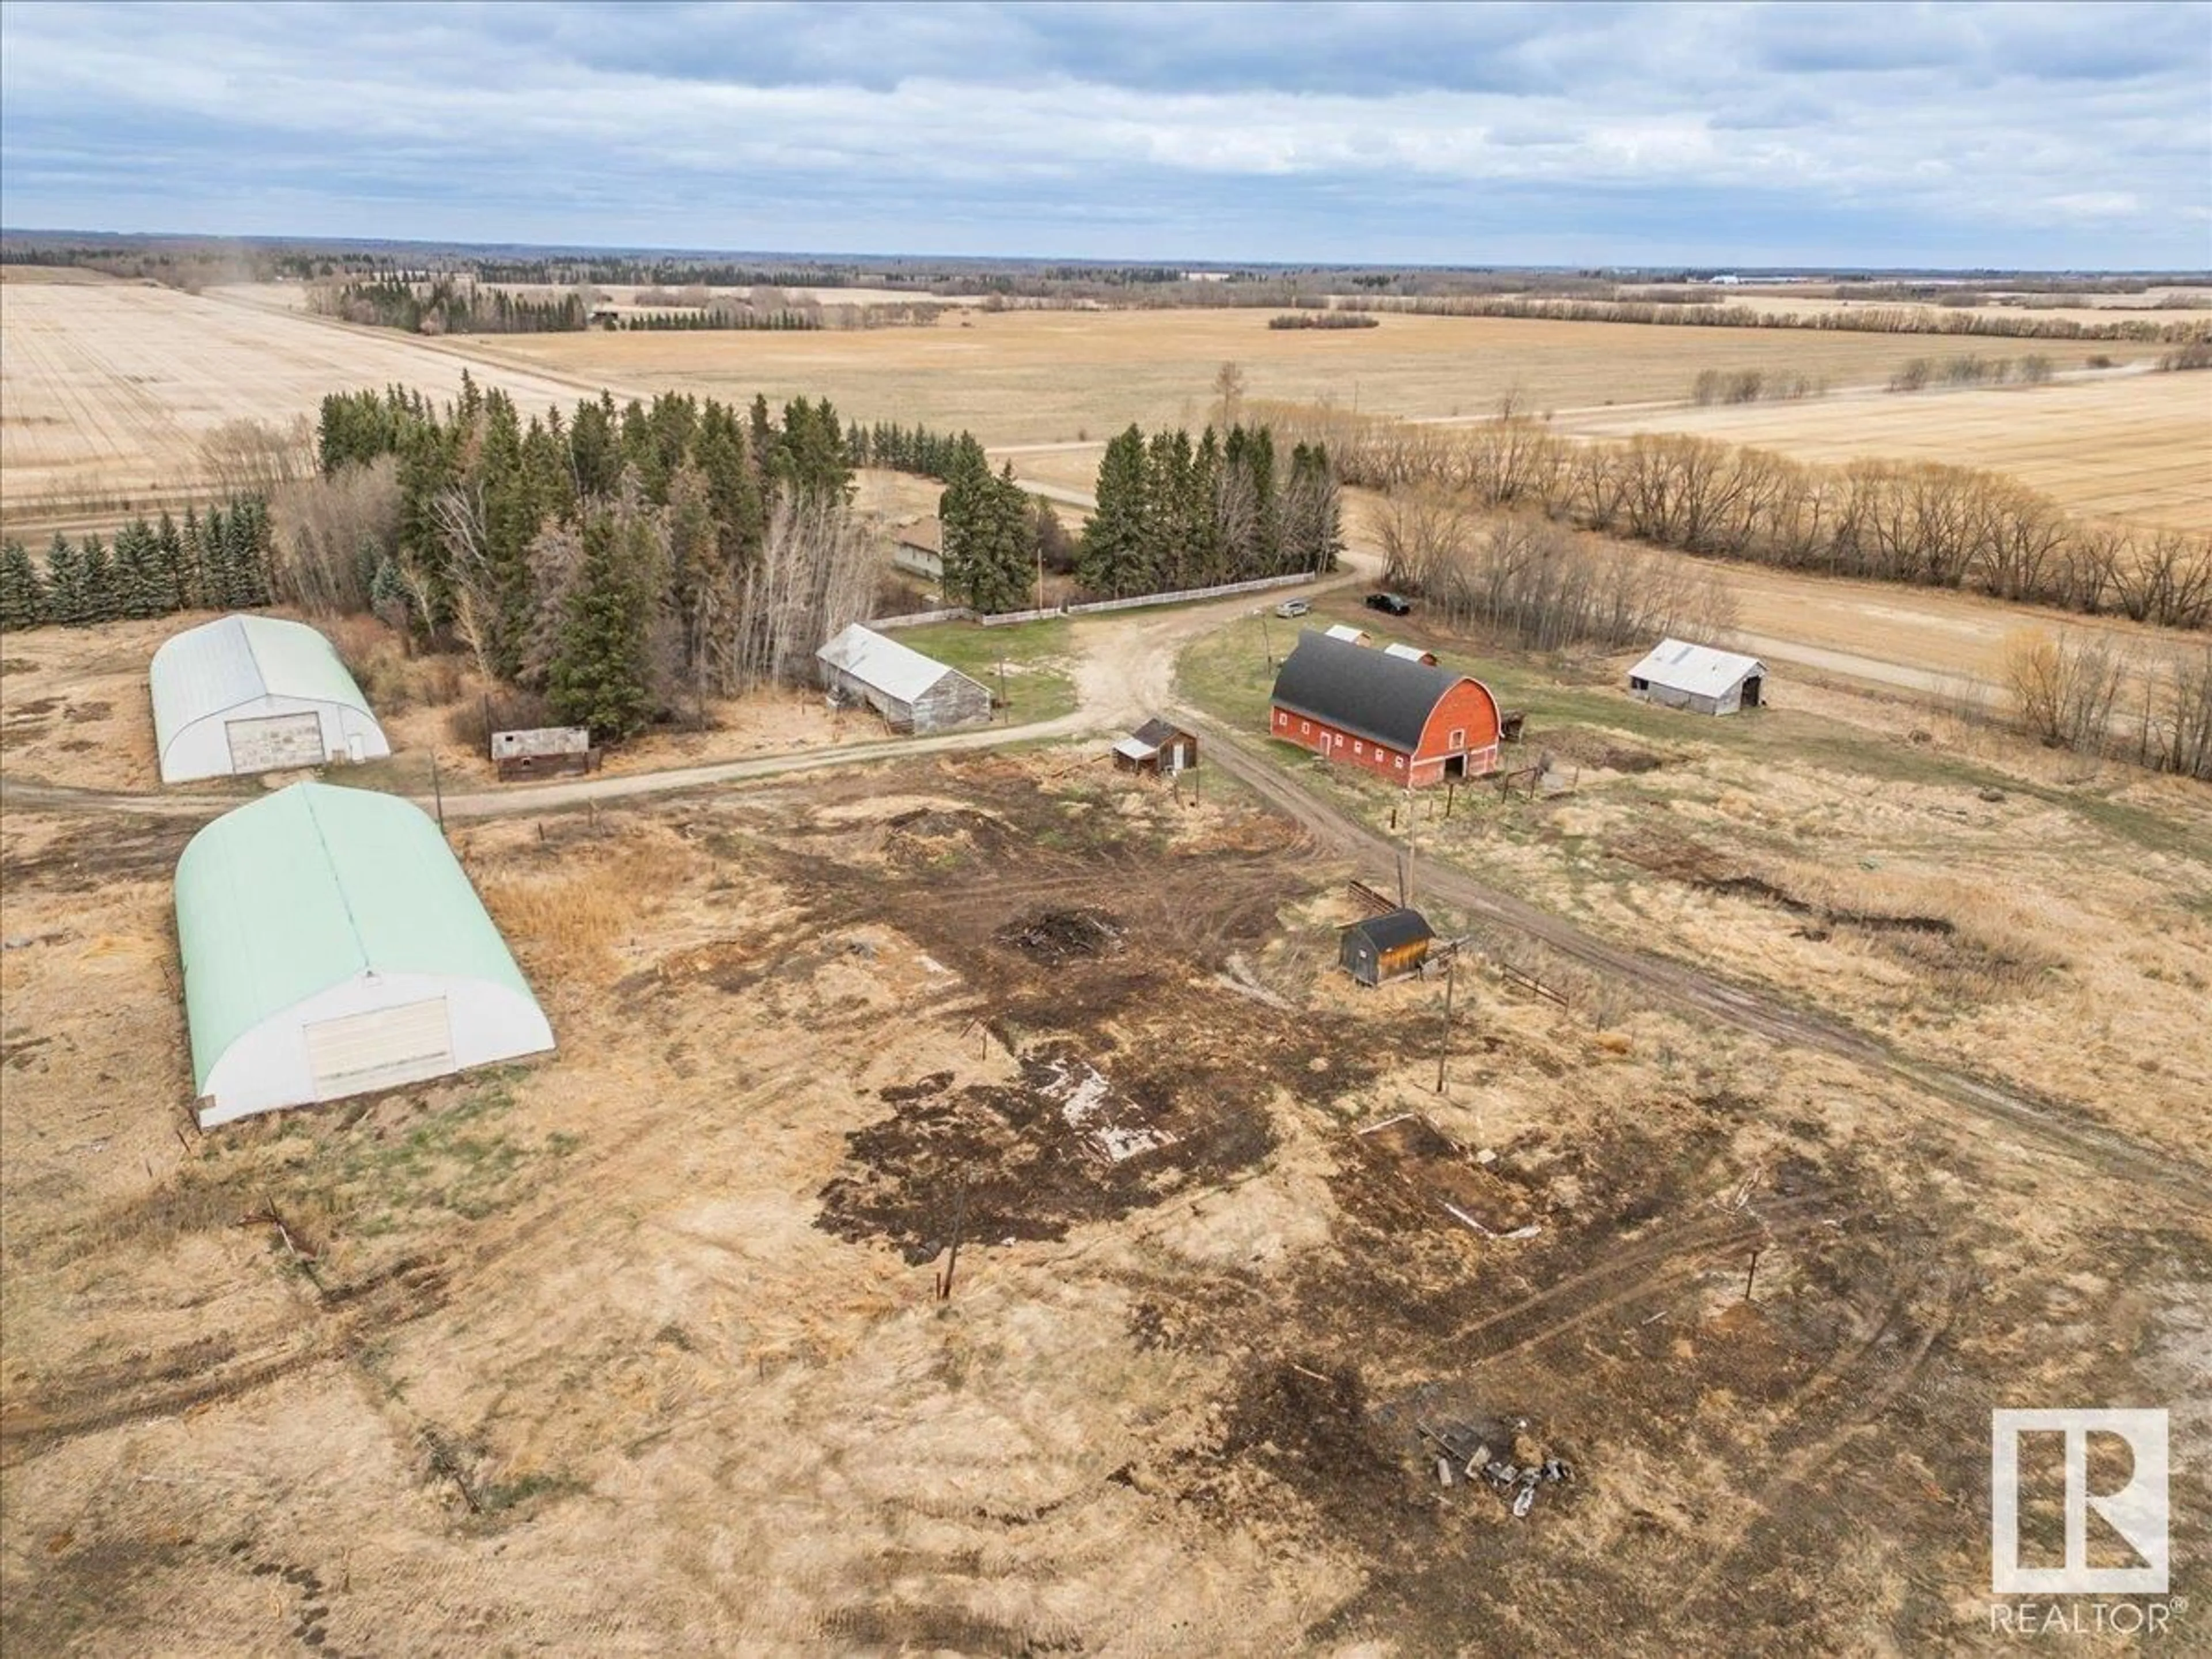 Shed for 49374 Rge Rd 14, Rural Leduc County Alberta T0C2P0